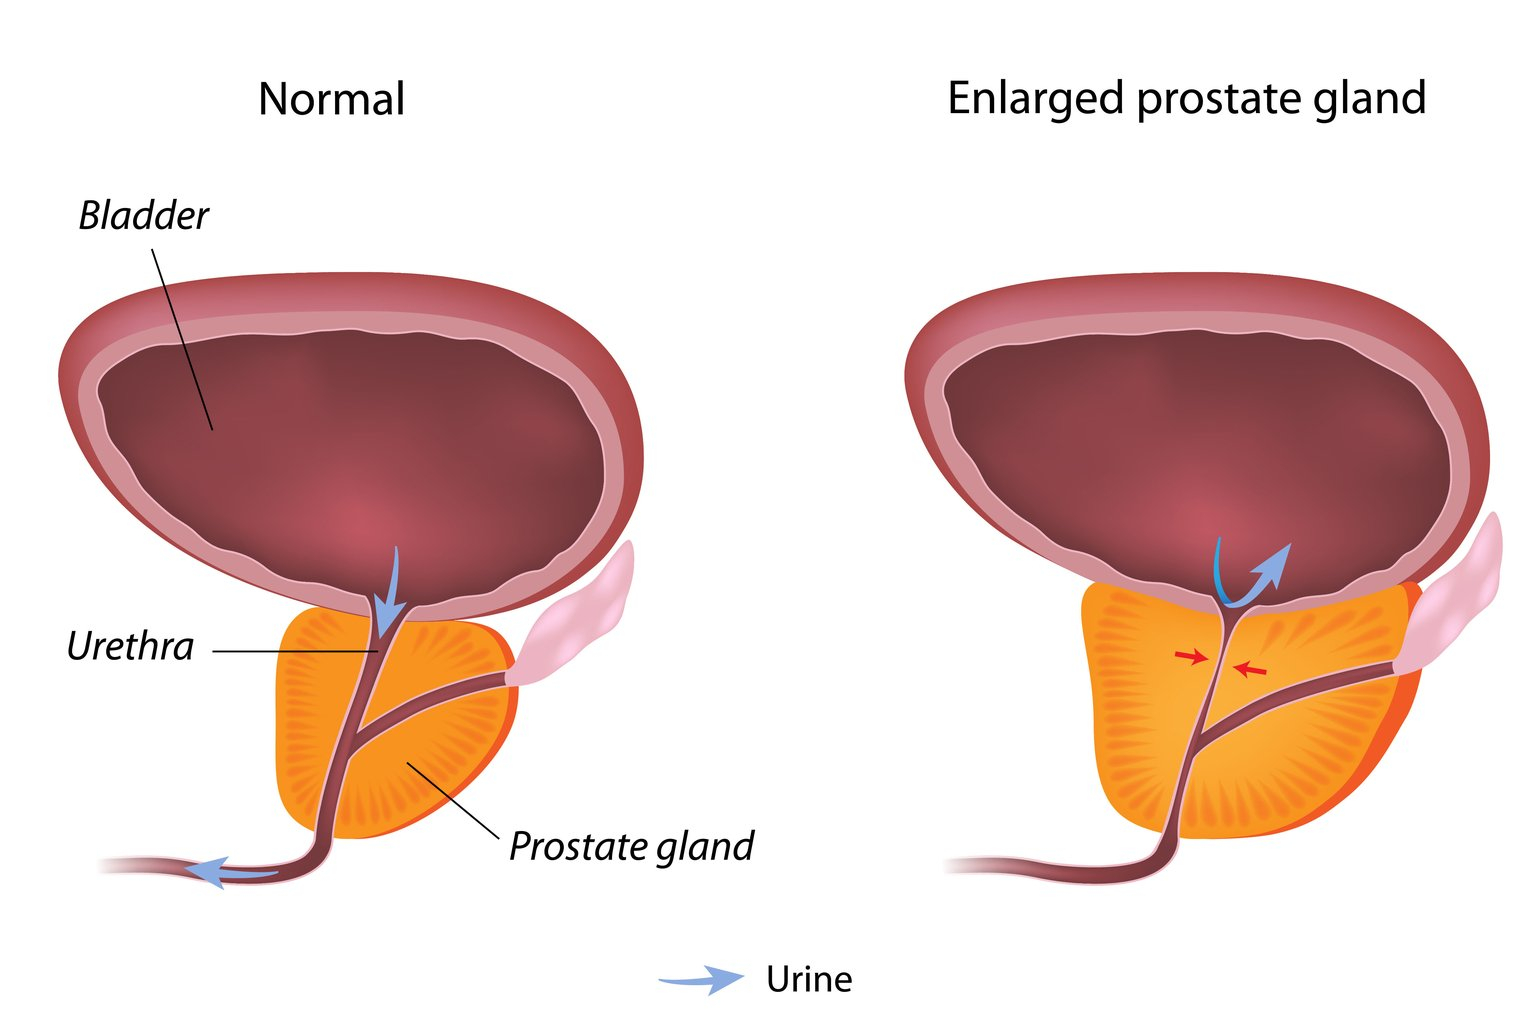 Informational graphic comparing and contrasting a normal prostate gland vs an enlarged prostate gland